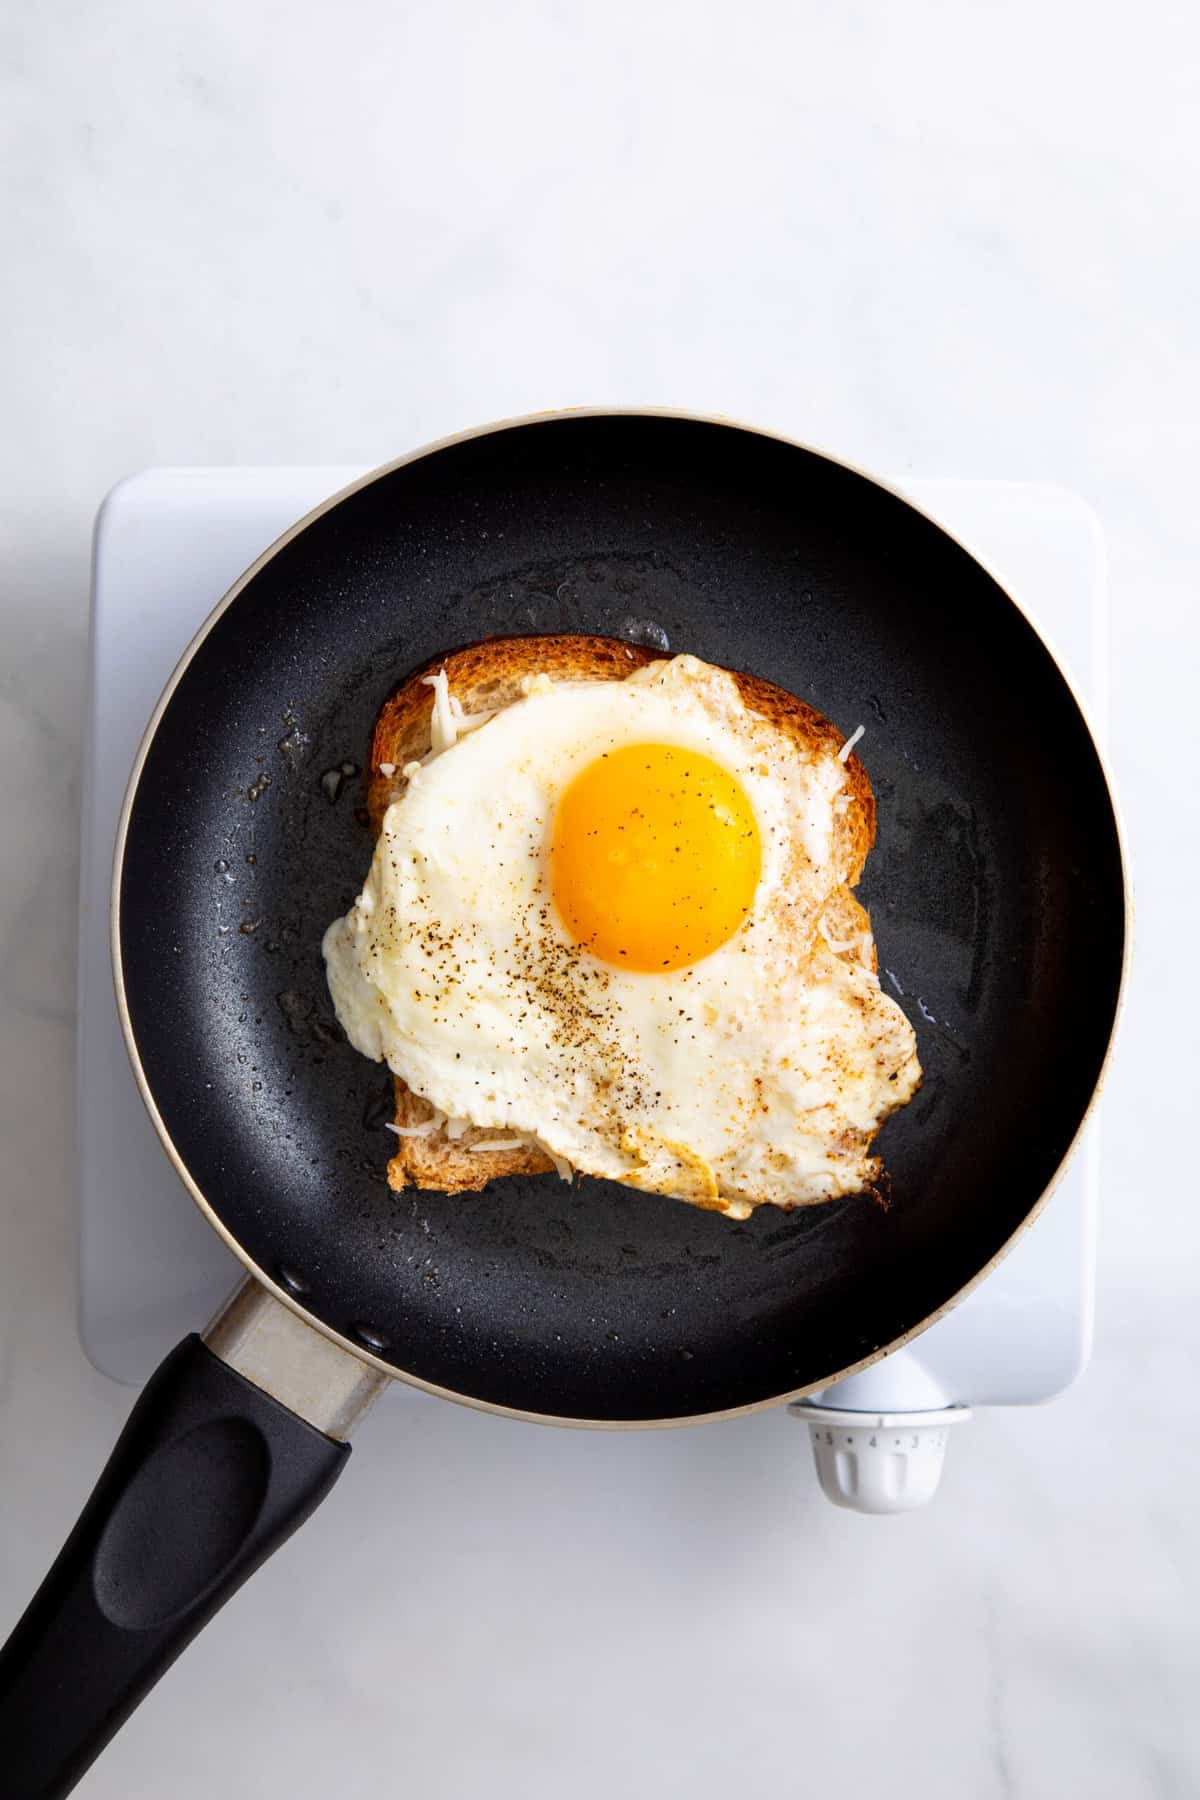 butter slice of white bread on a skillet topped with shredded cheese and a fried egg